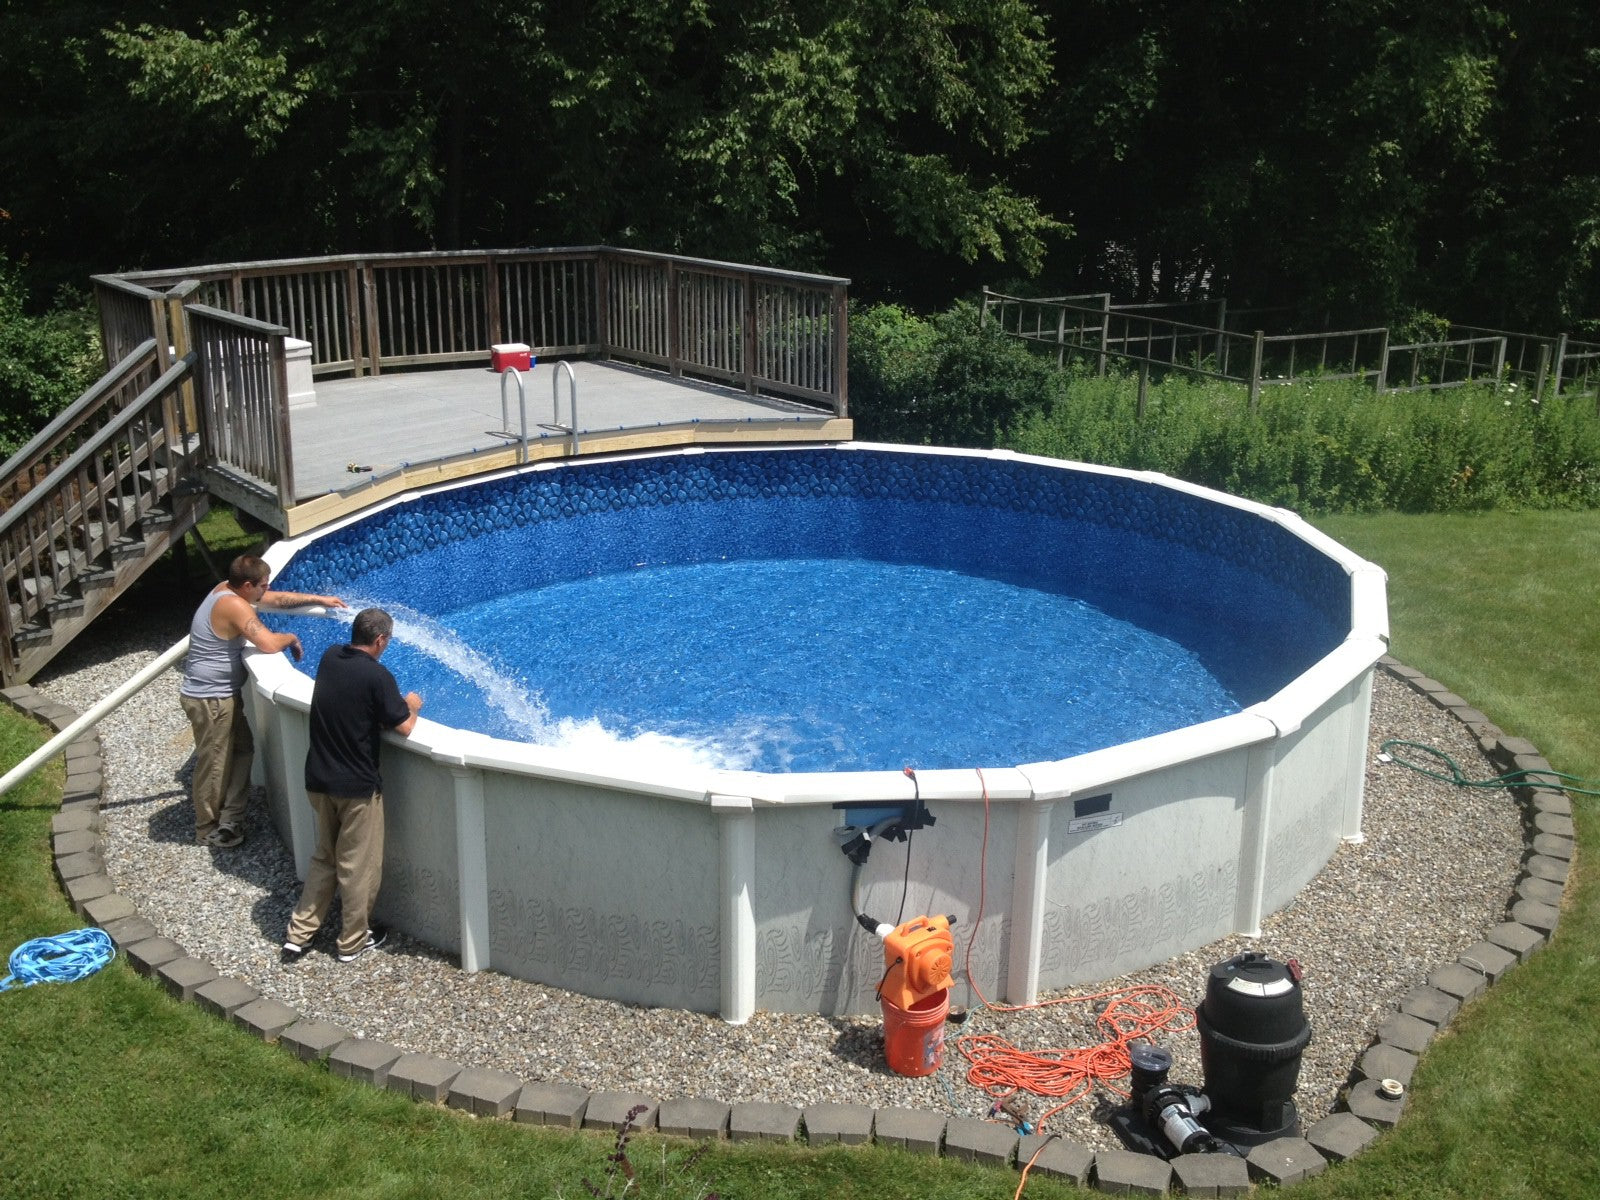 Tips for Opening an Above Ground Pool - Aqua Leisure